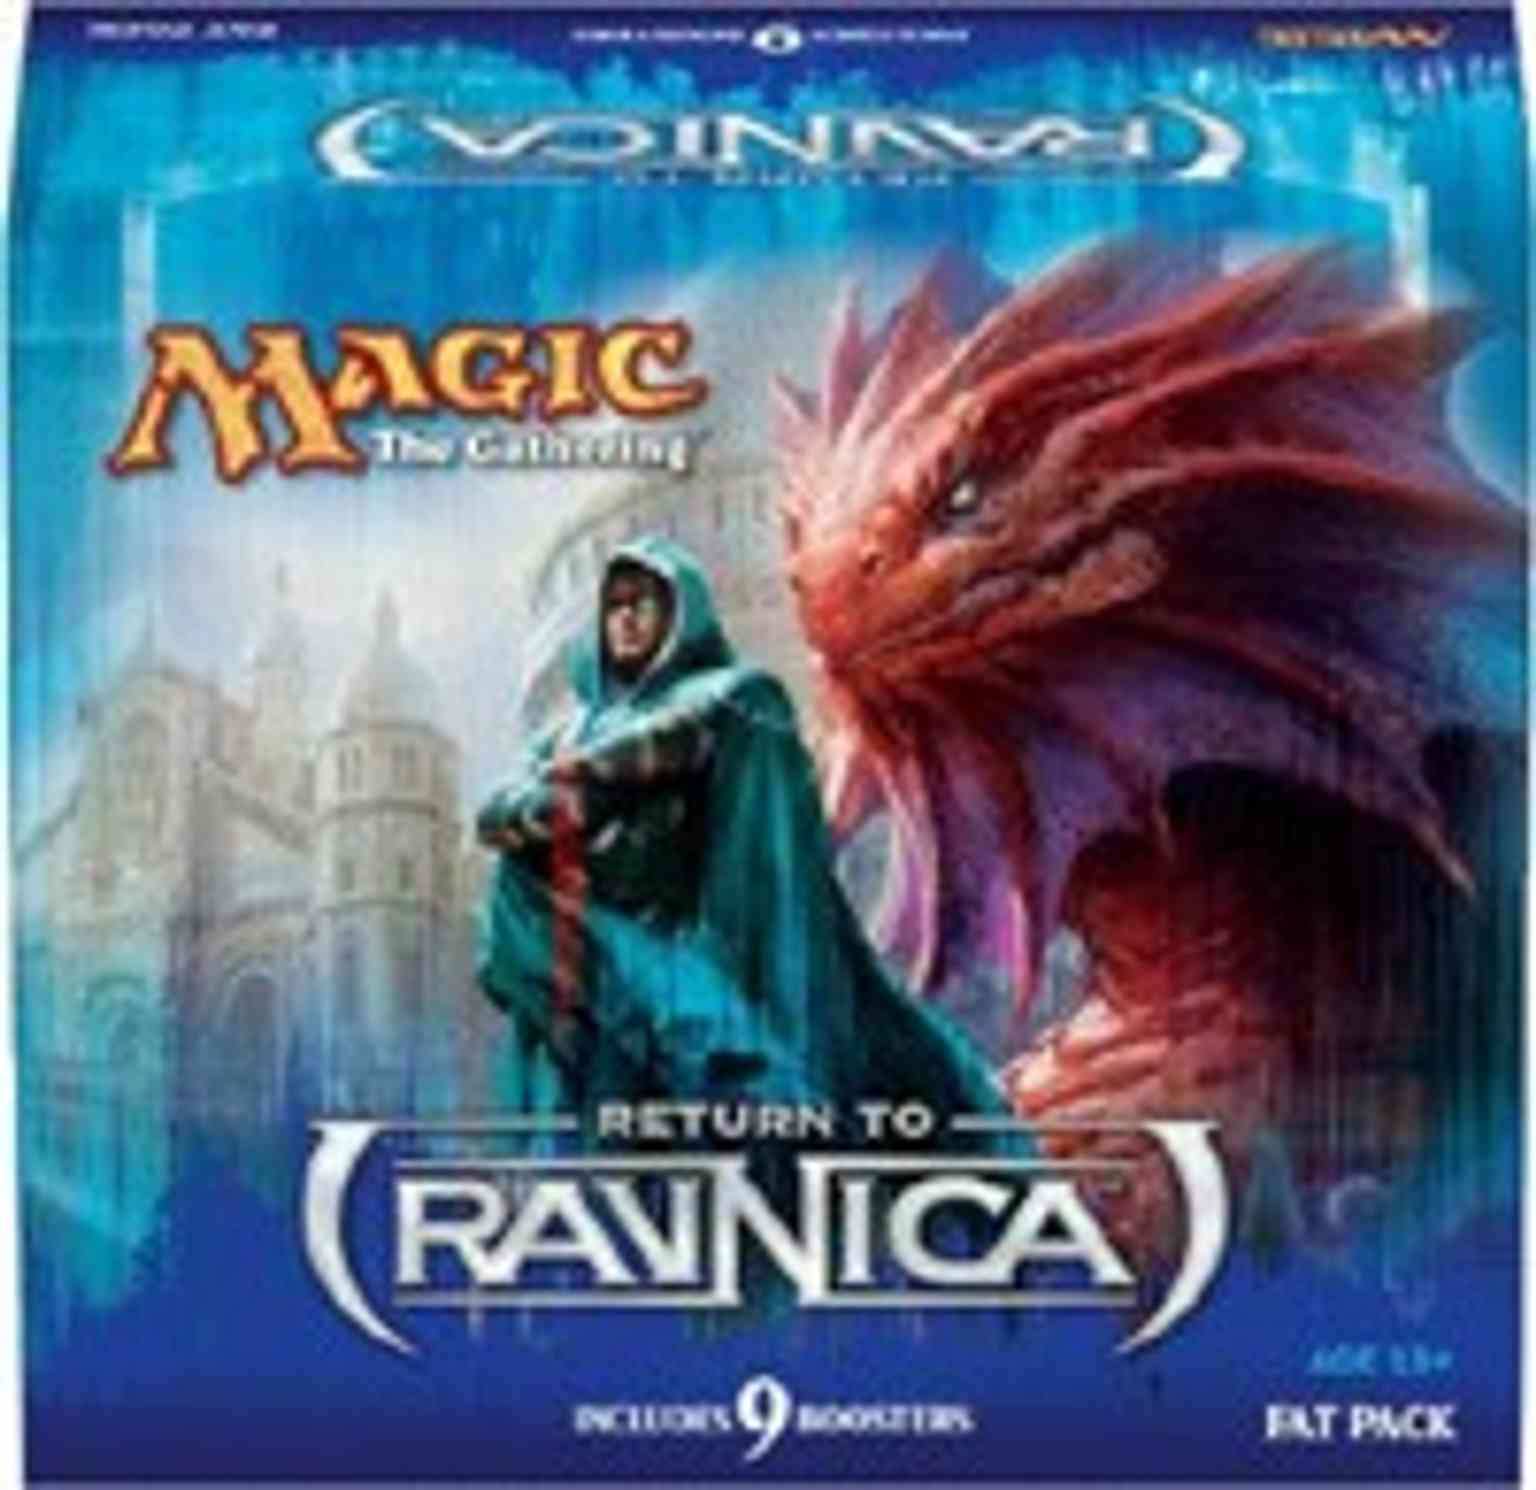 Return to Ravnica - Fat Pack magic card front